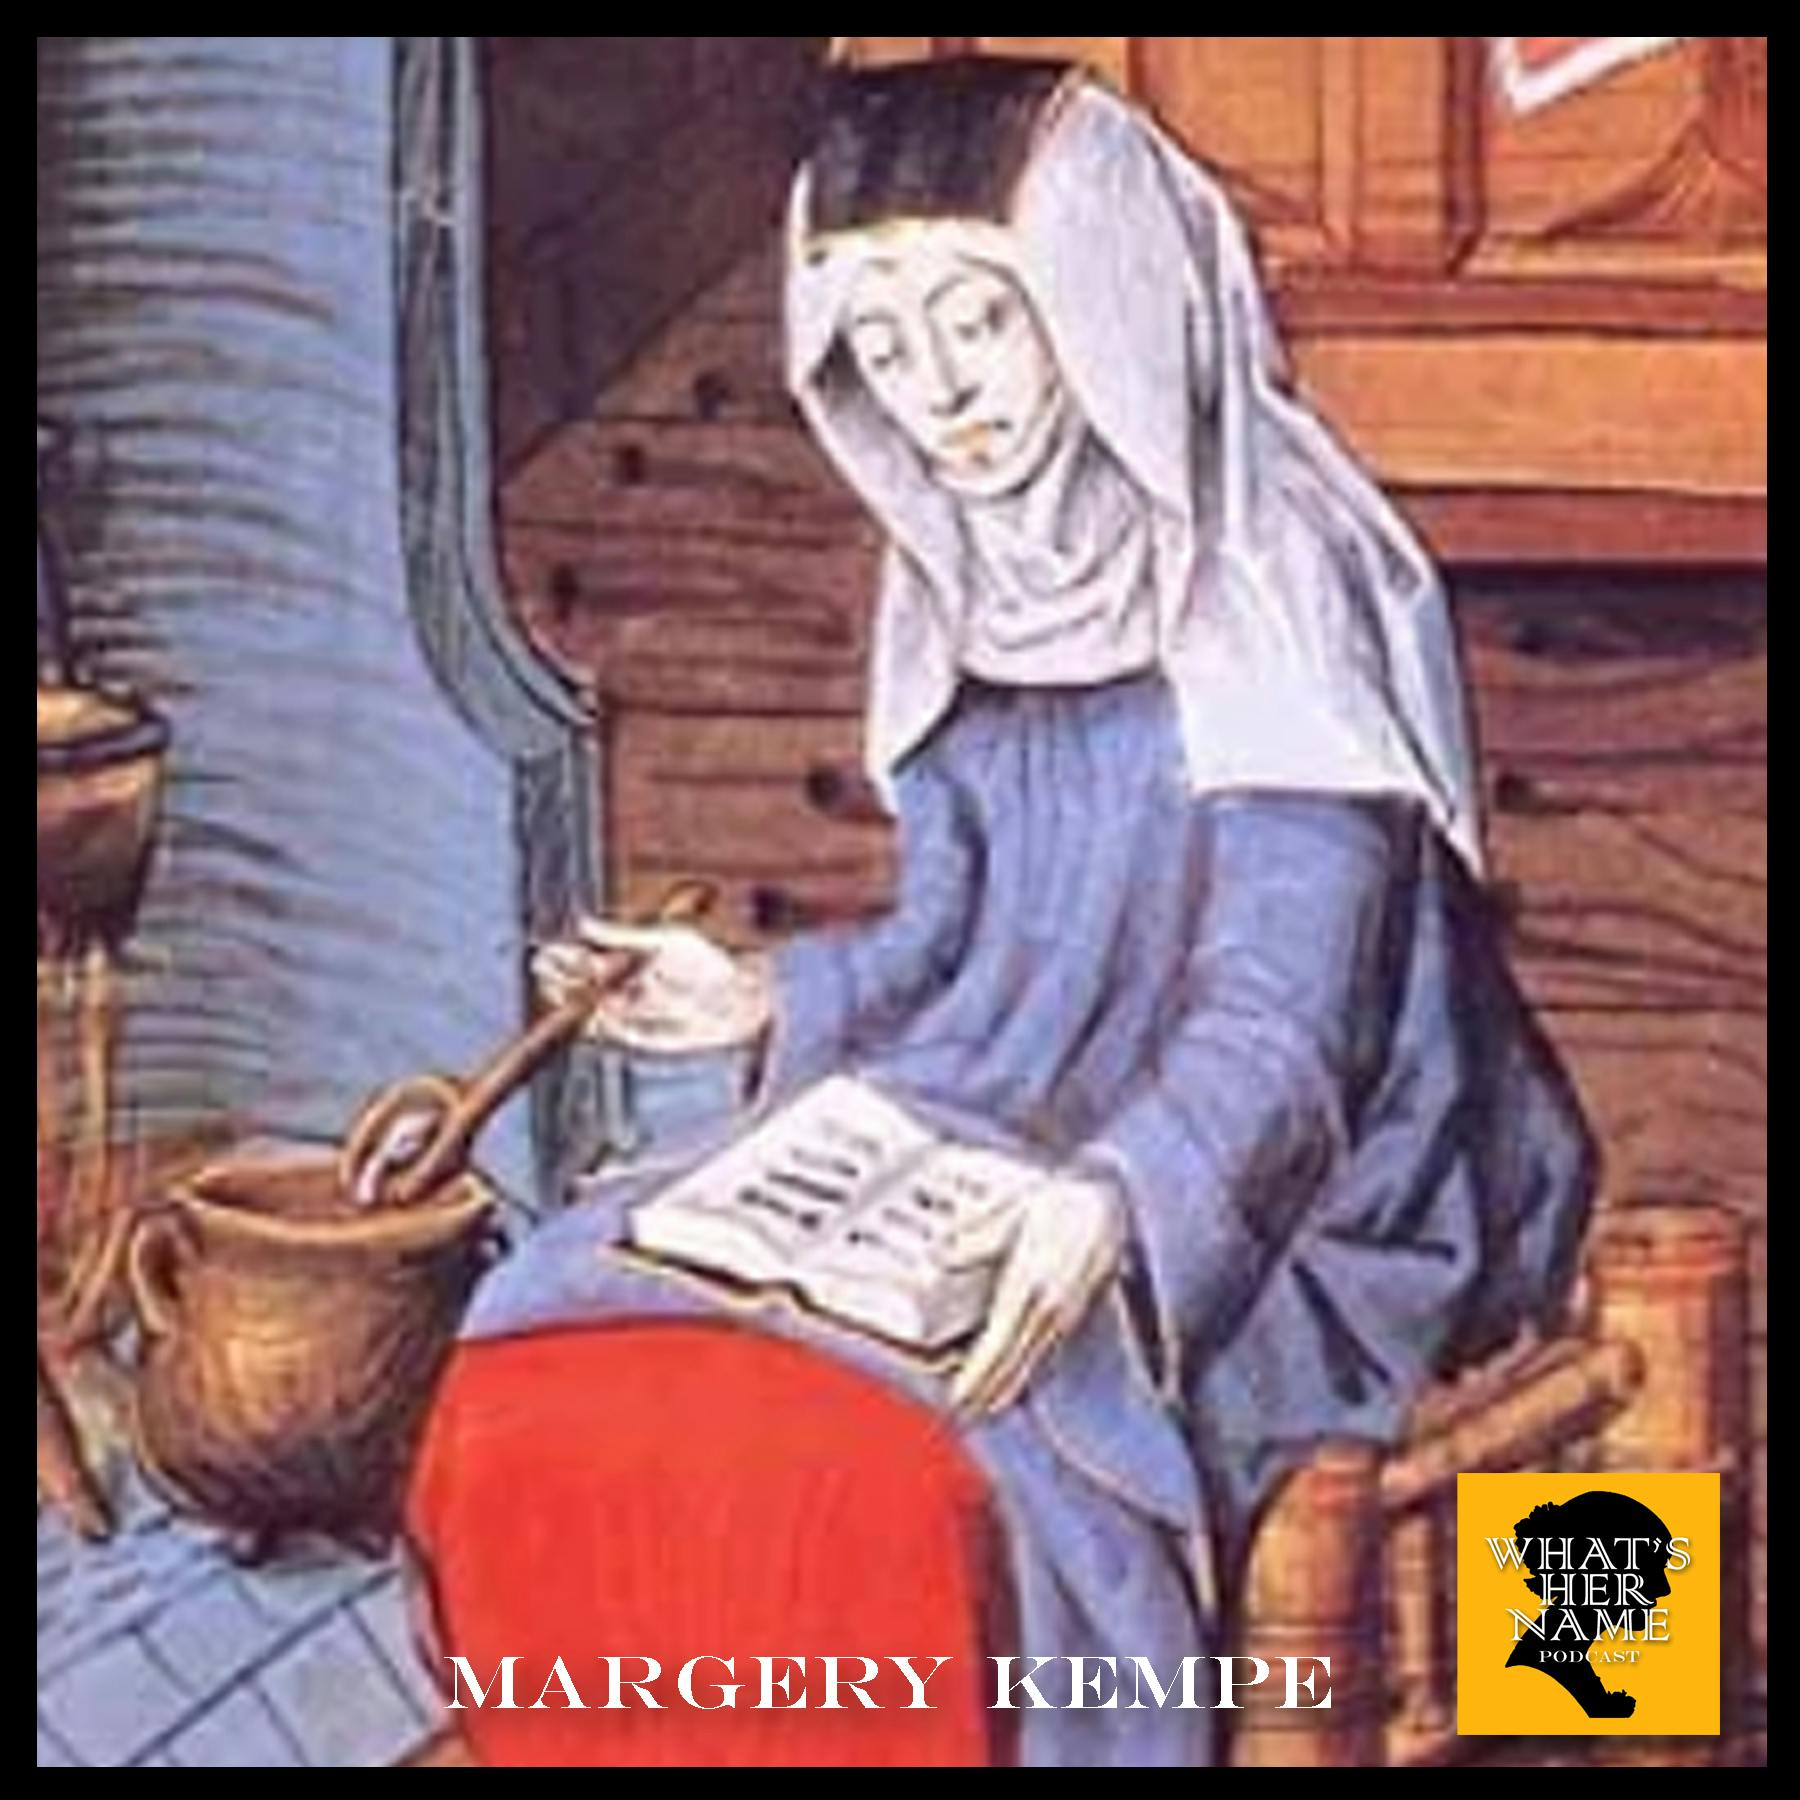 THE MYSTIC Margery Kempe